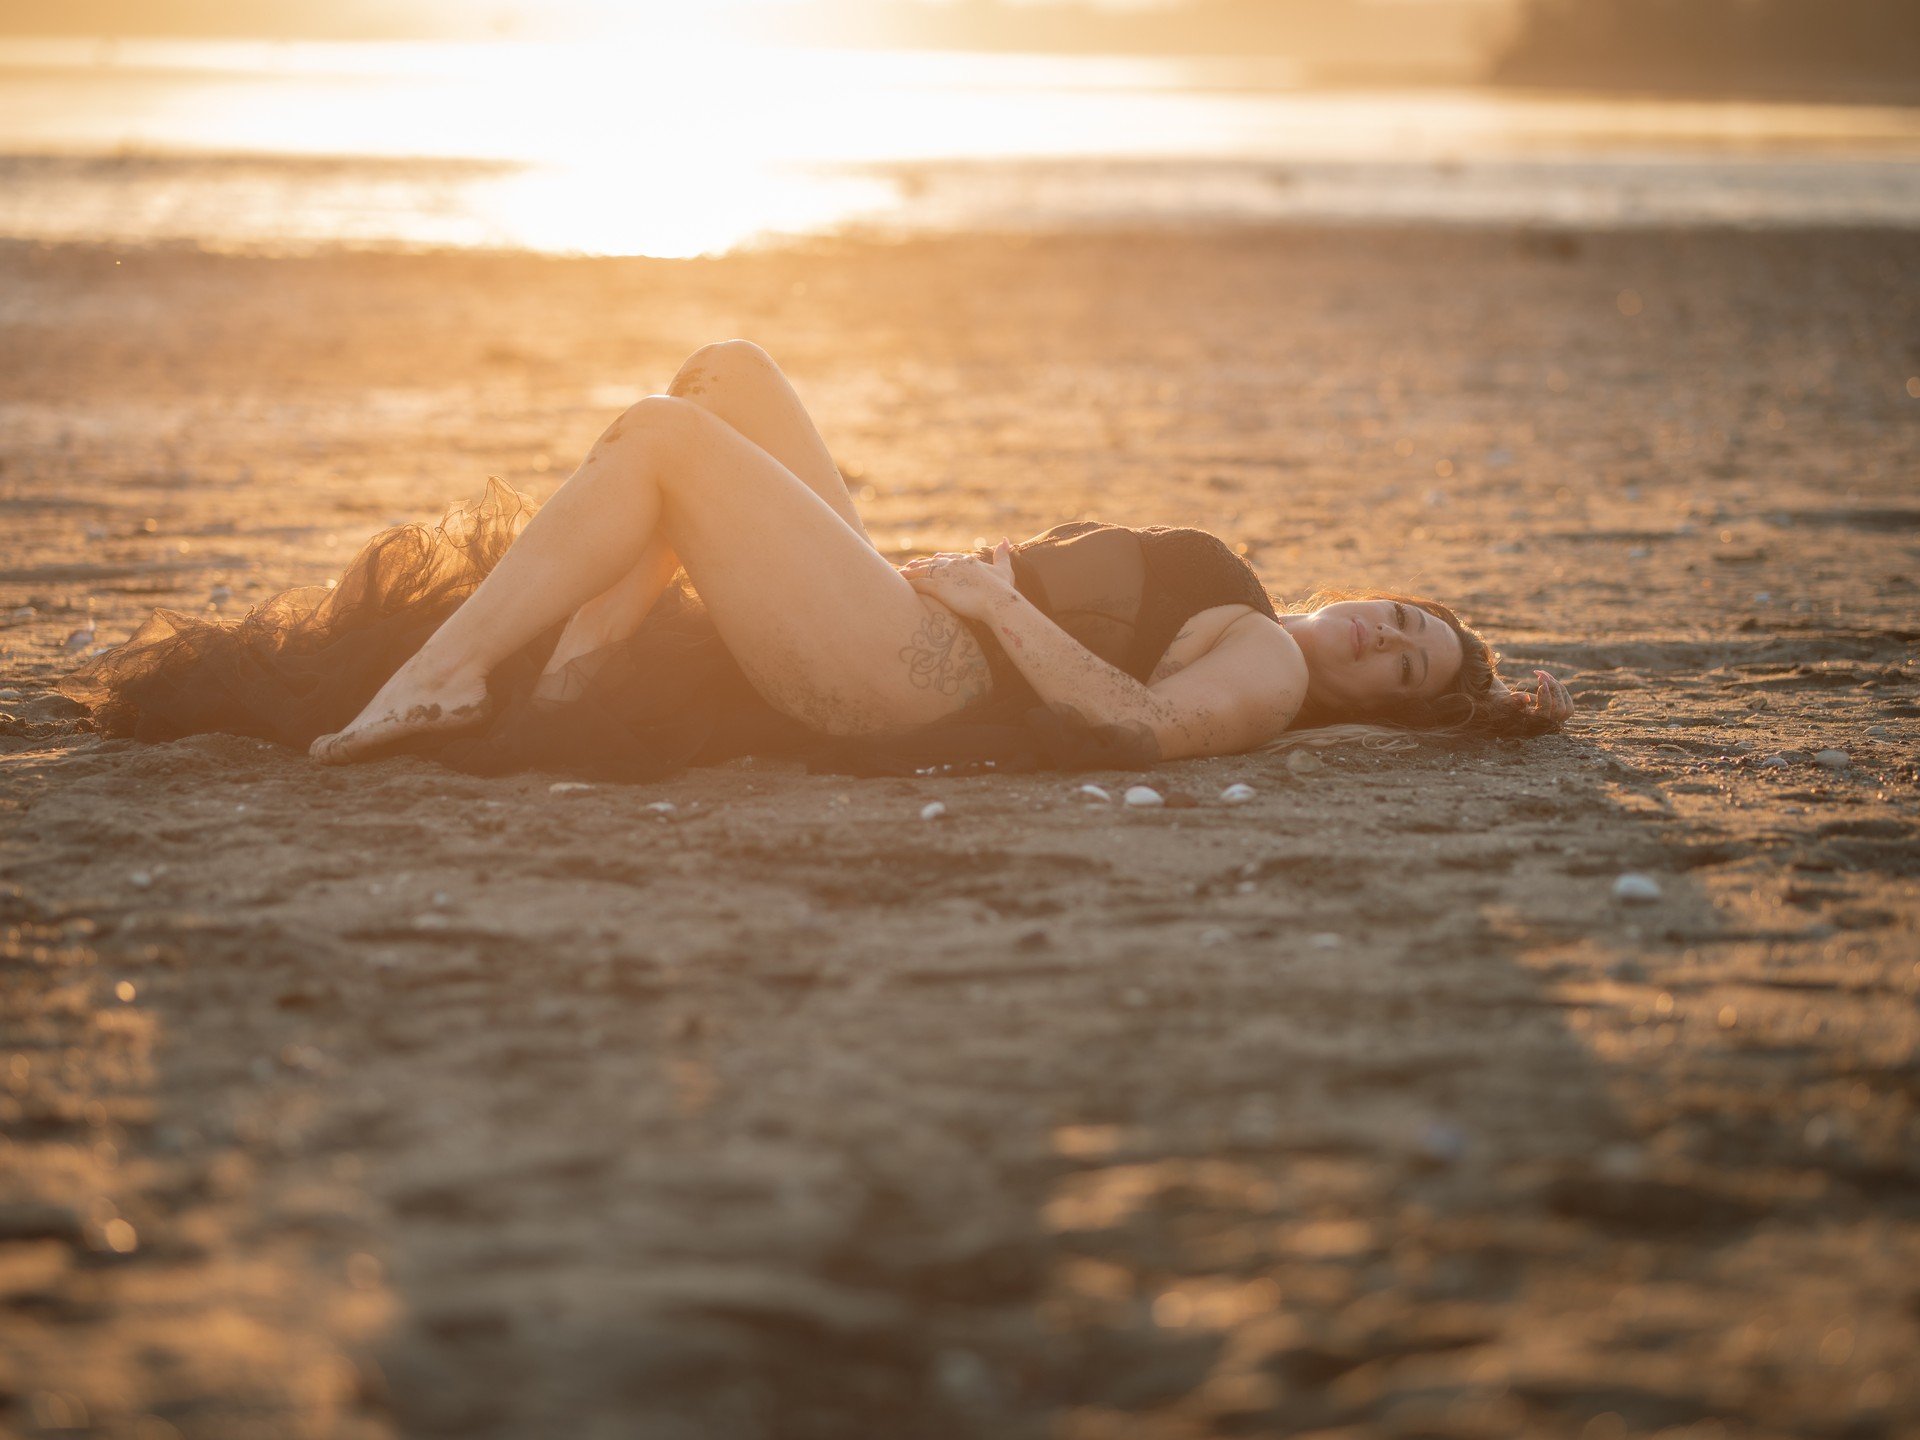 Sometimes the sun comes out at just the right time! From our photoshoot with @queenfactor 

#sunsetportrait #beachportraits #bcphotographer #portraitphotography #strongwomen #sunsetphotoshoot